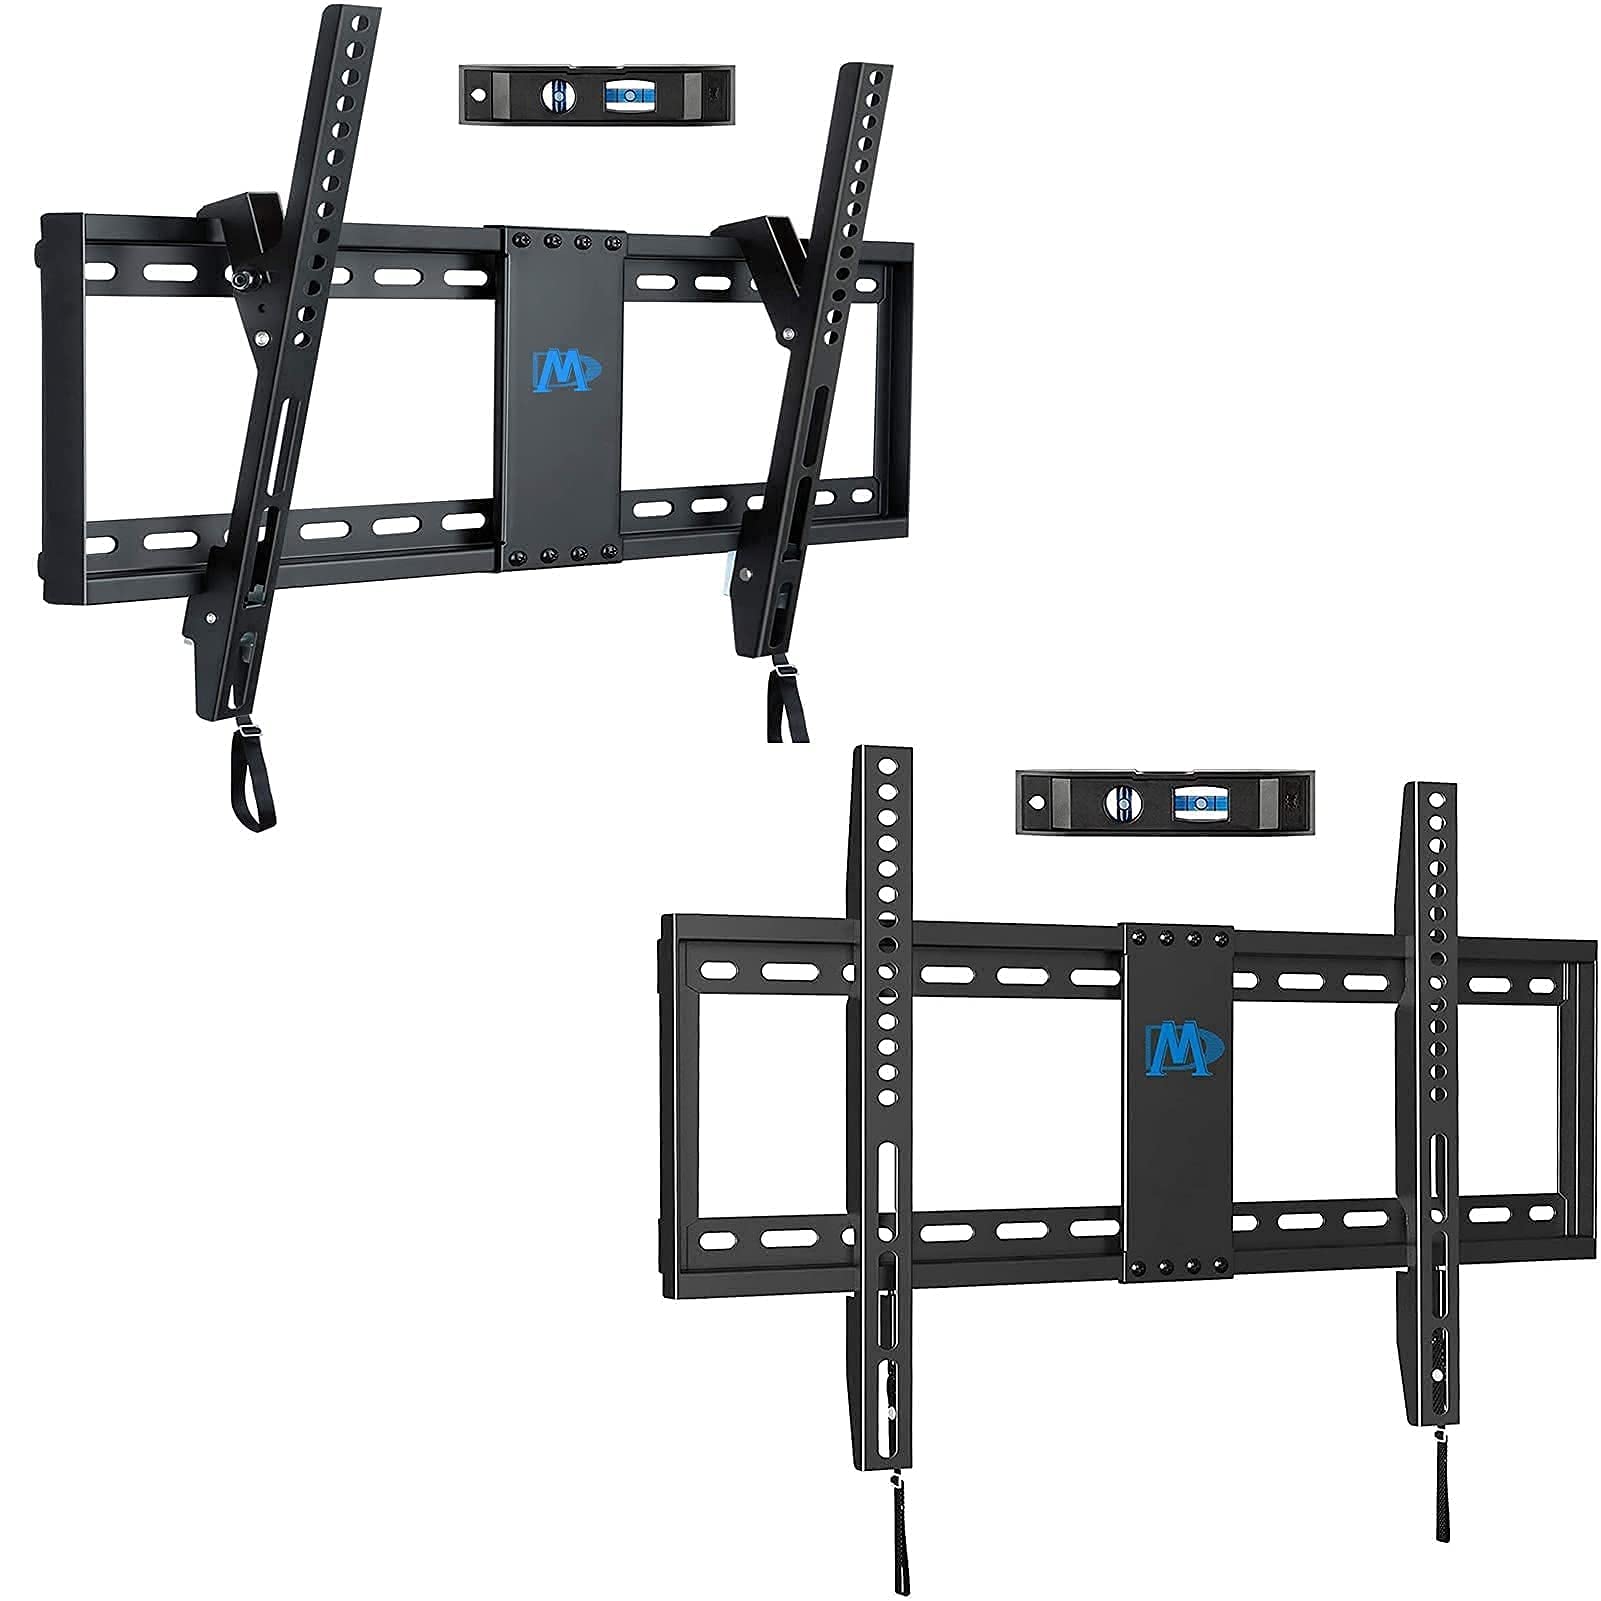 Mounting Dream Tilt TV Mount for 37-70 Inch TV MD2268-LK, Bundle with Flush Slim Low Profile Fixed TV Wall Mount MD2163-K